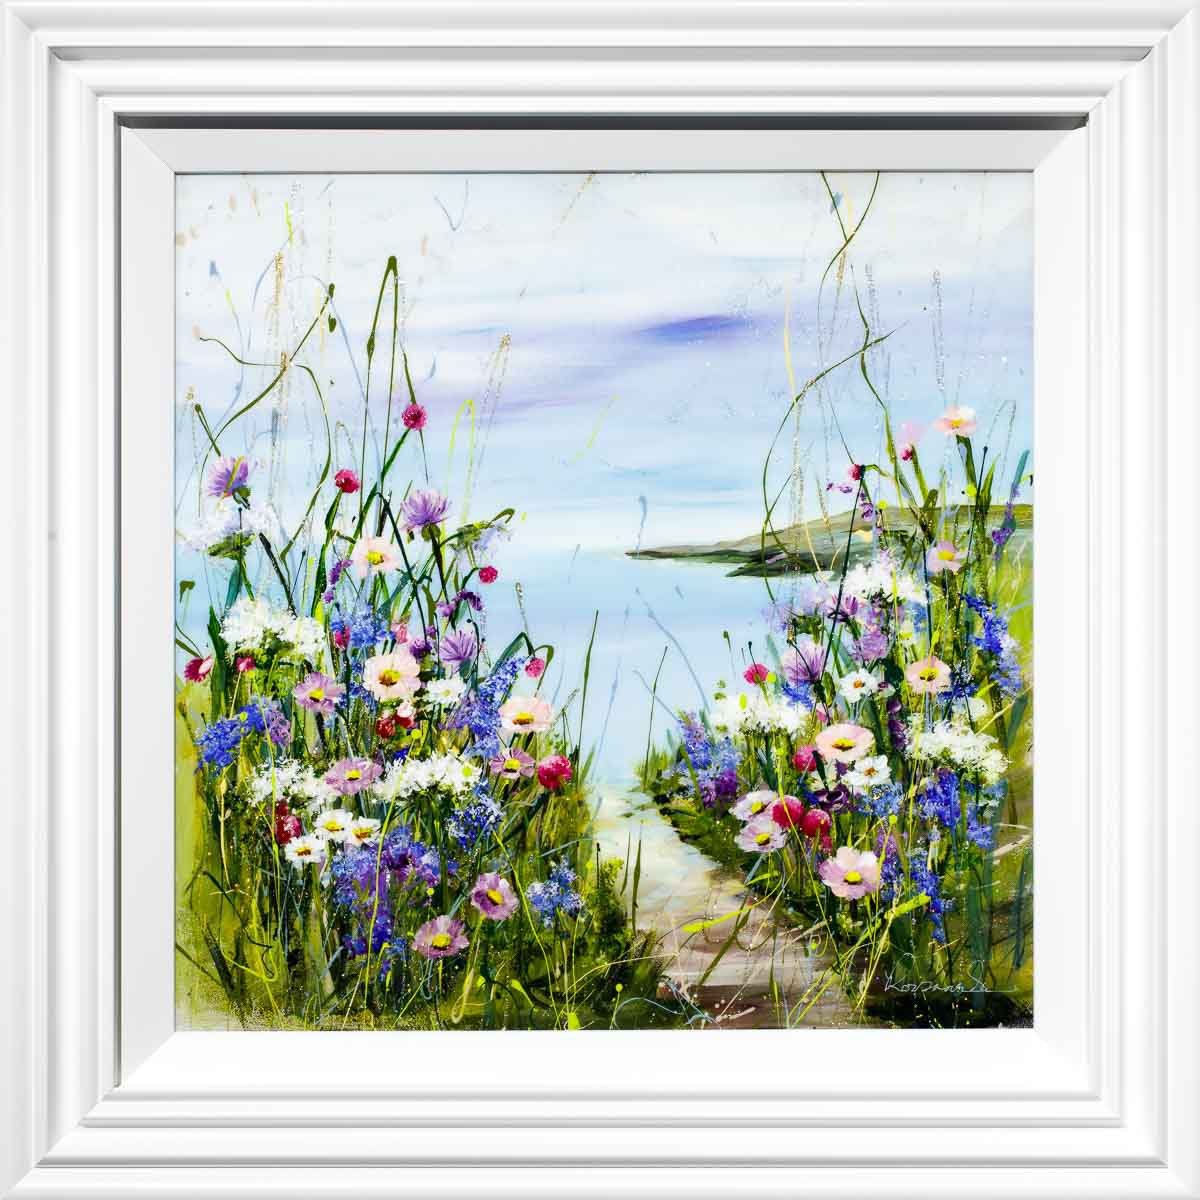 Stroll to the Shore - Original Rozanne Bell Framed